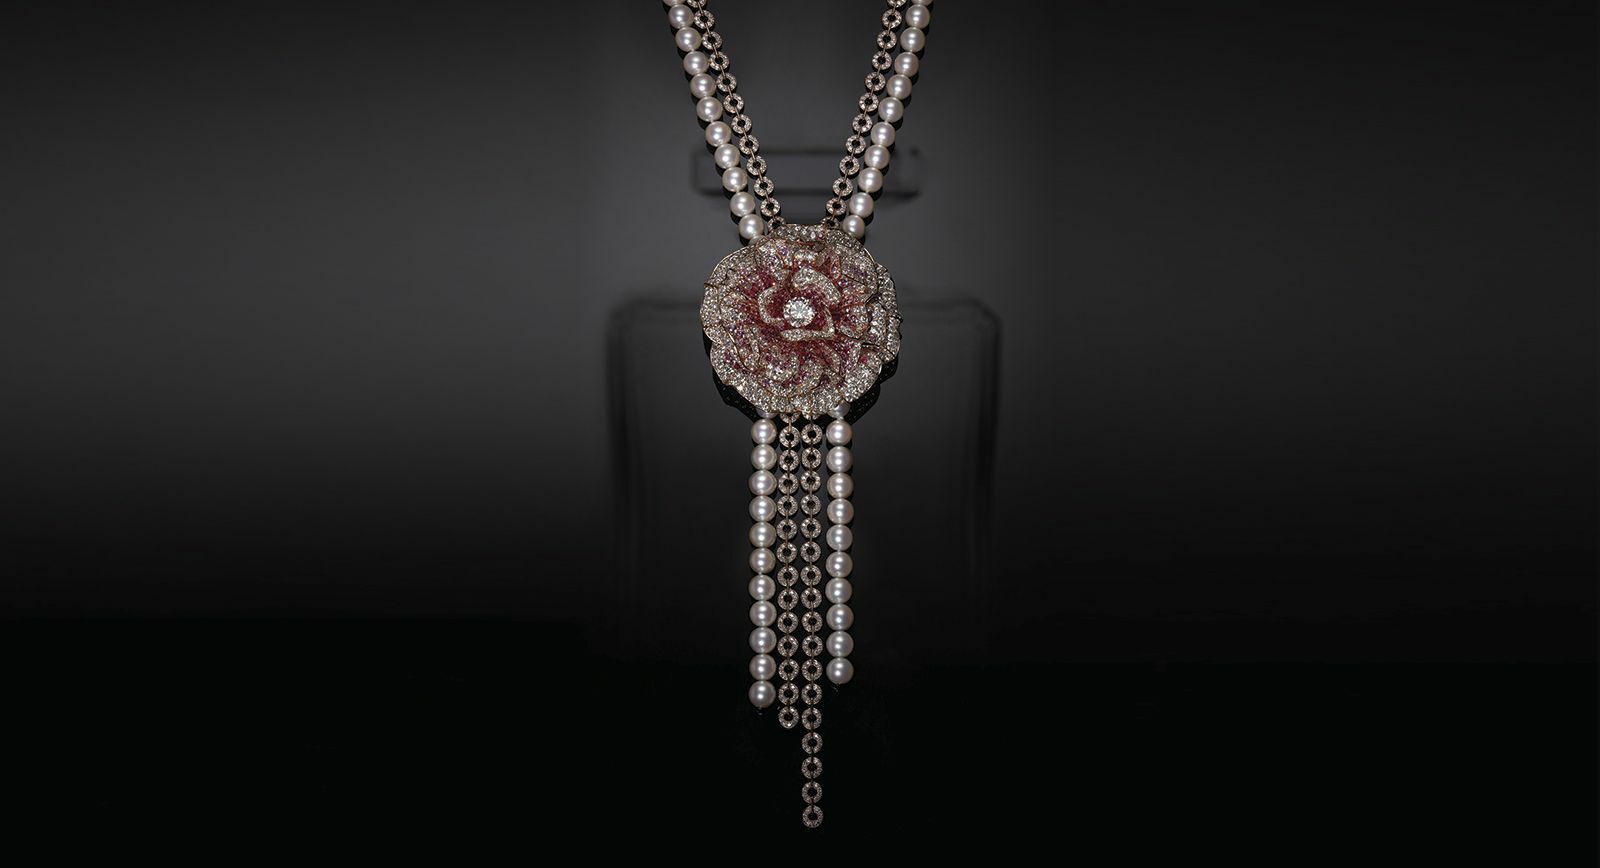 Chanel Collection N°5 High Jewellery inspired by the brand's iconic Chanel N°5 perfume